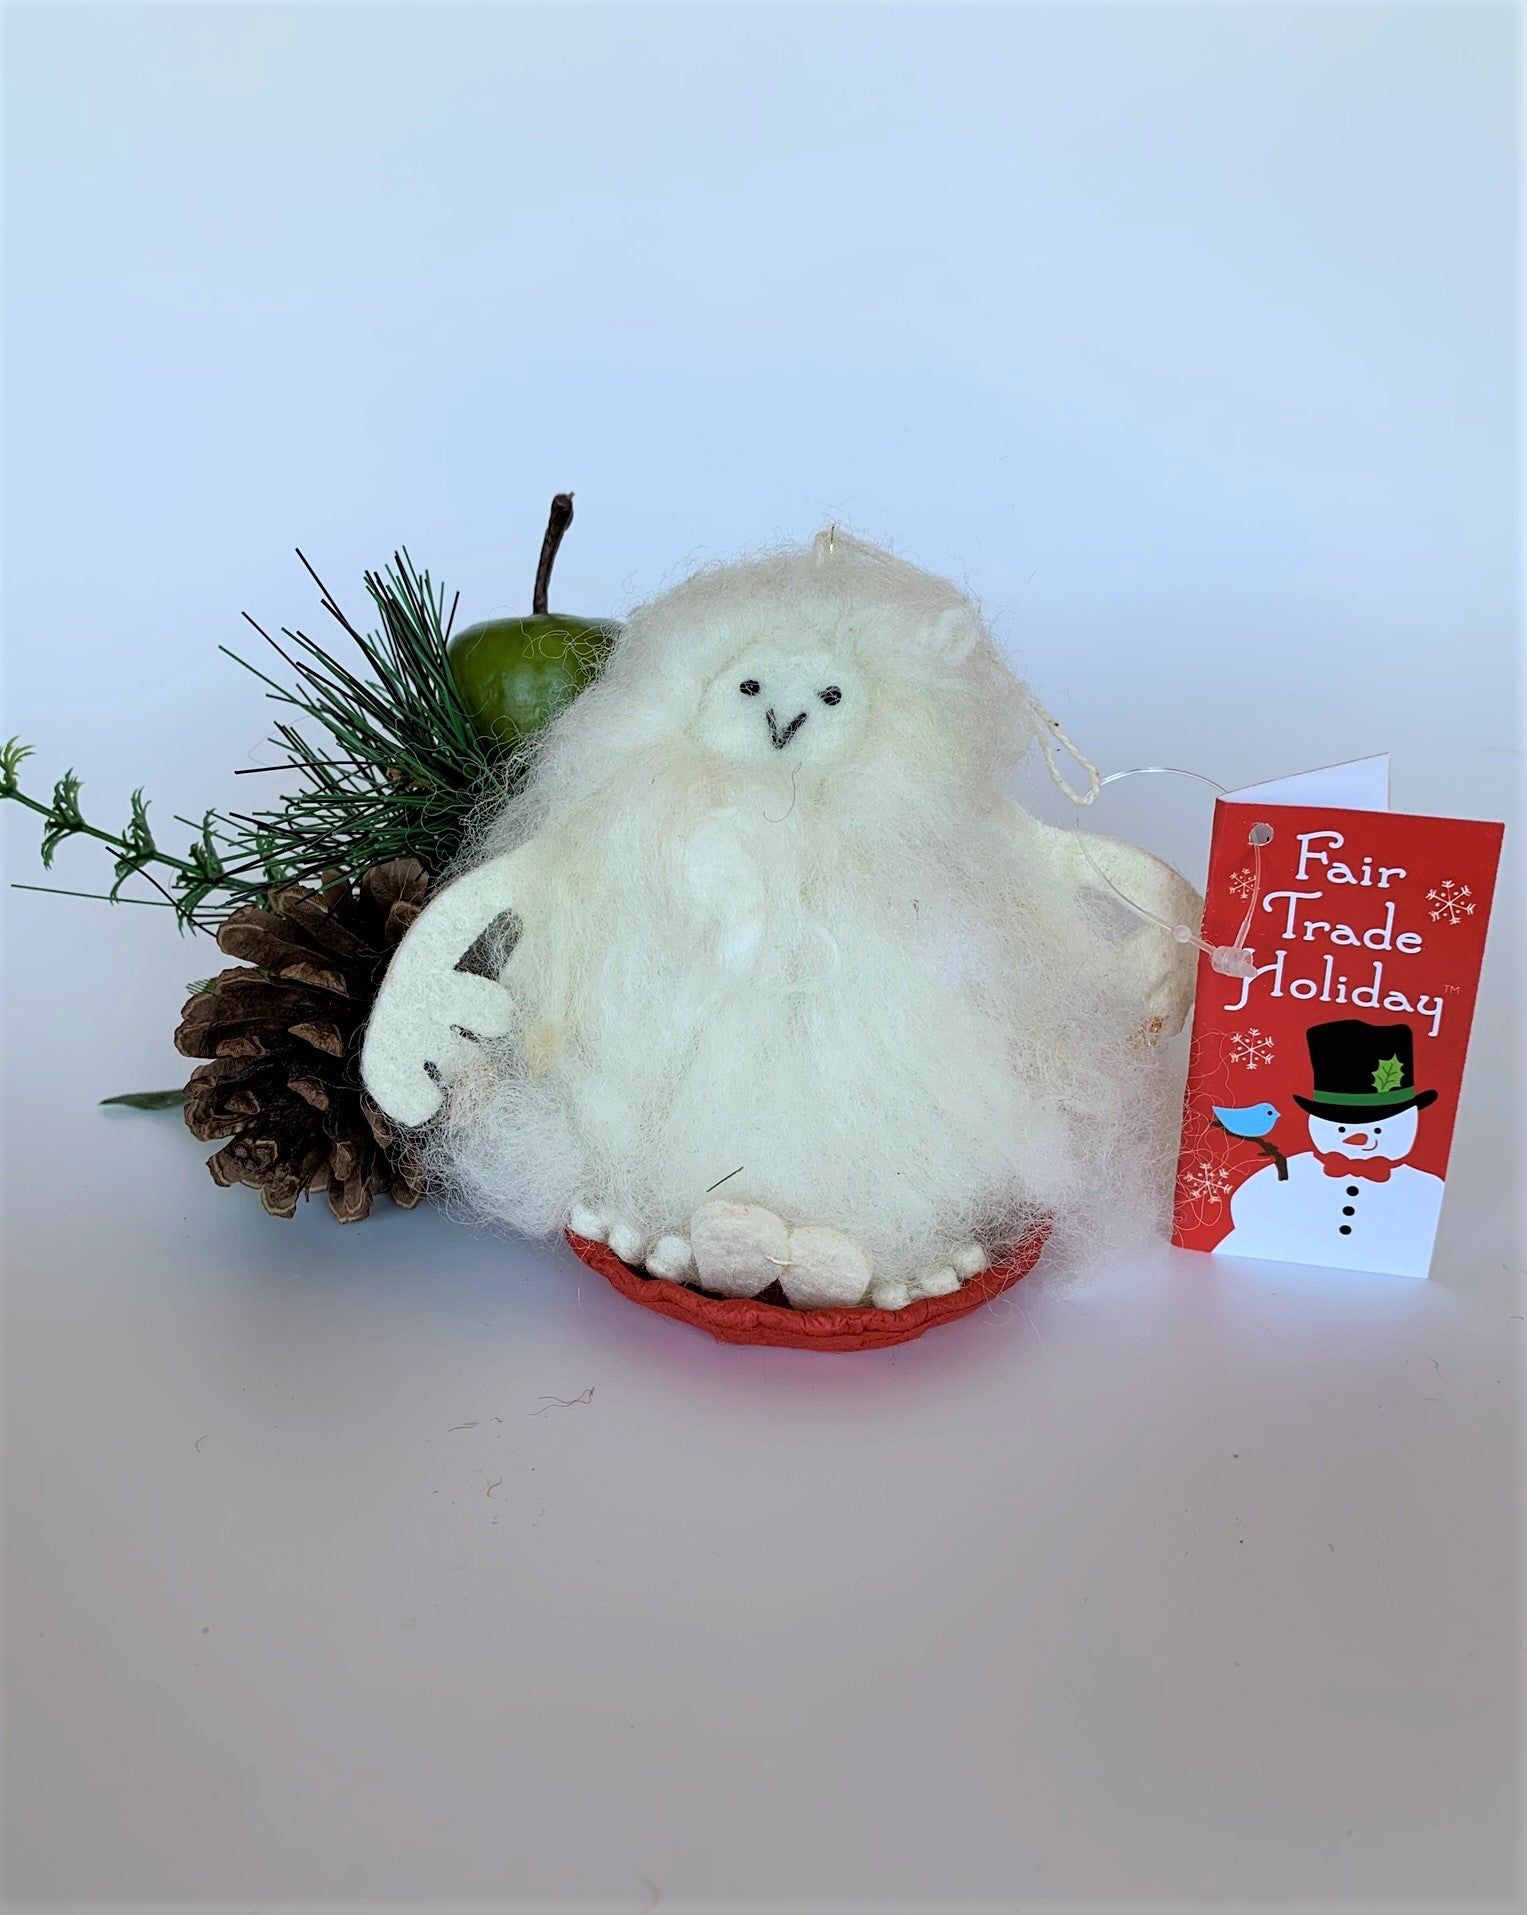 This is a sledding Yeti Christmas ornament that is handcrafted (fair trade) and made of 100% natural wool. The sled is handmade using paper that is hardened and feels almost like thin wood.  It is off-white with black accents (eyes and mouth), with off-white felted arms and feet. It sits on a round, red sled with gold colored "rope" handles  on either side.  Approximately 4.5"x2.75"x2.75".  It comes with a detachable fair trade holiday "to/from" tag to use if giving this as a gift.